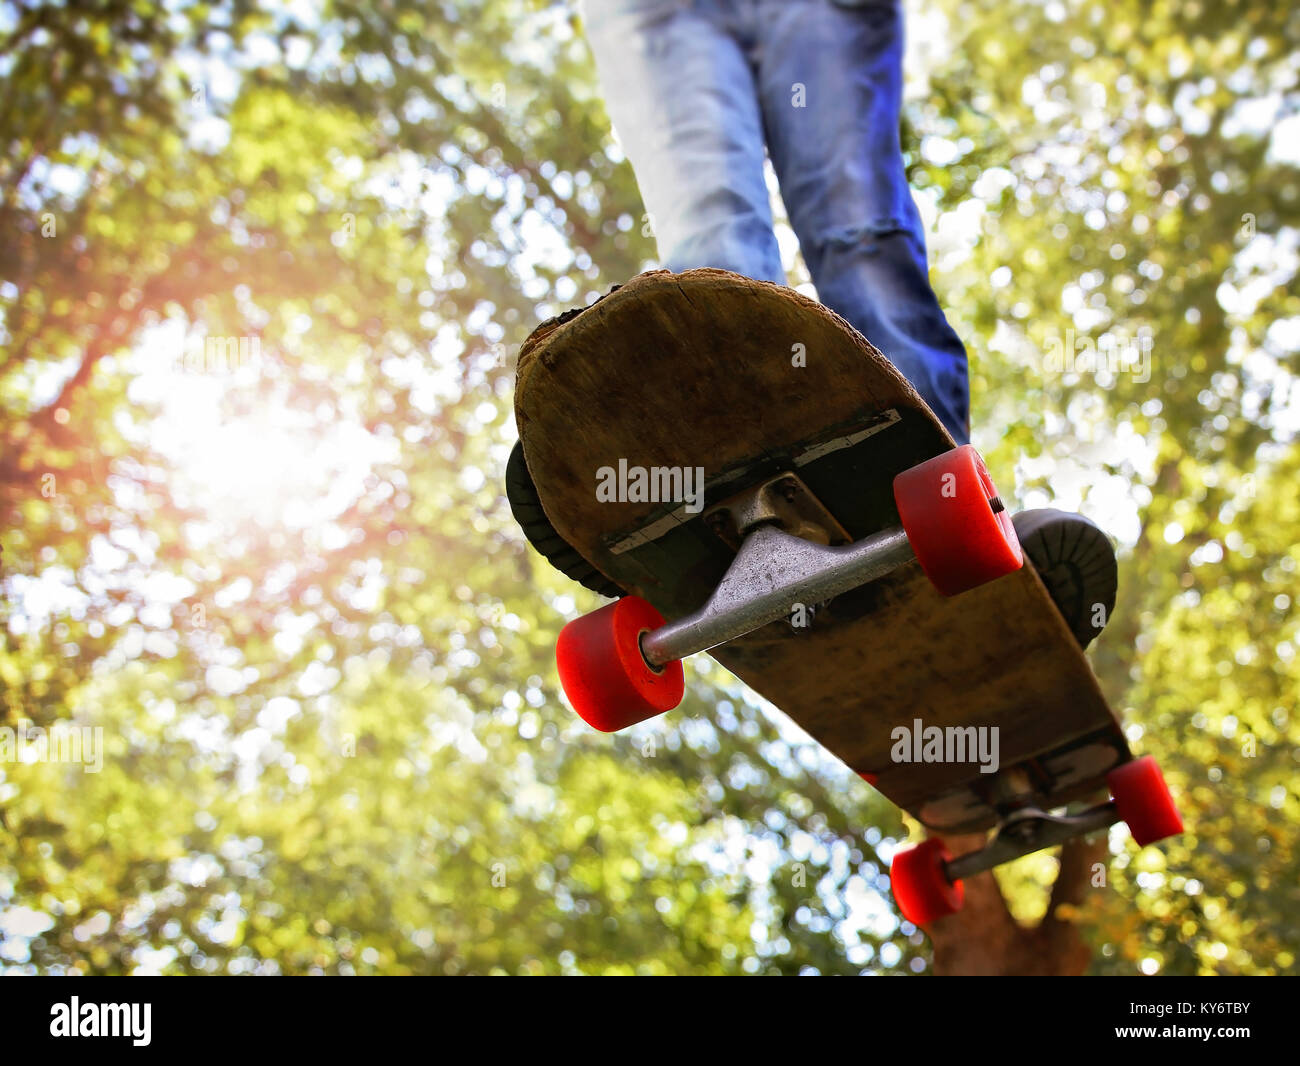 a wide angle shot of a skateboarder jumping trees in the background toned with a retro vintage instagram filter app or action effect Stock Photo